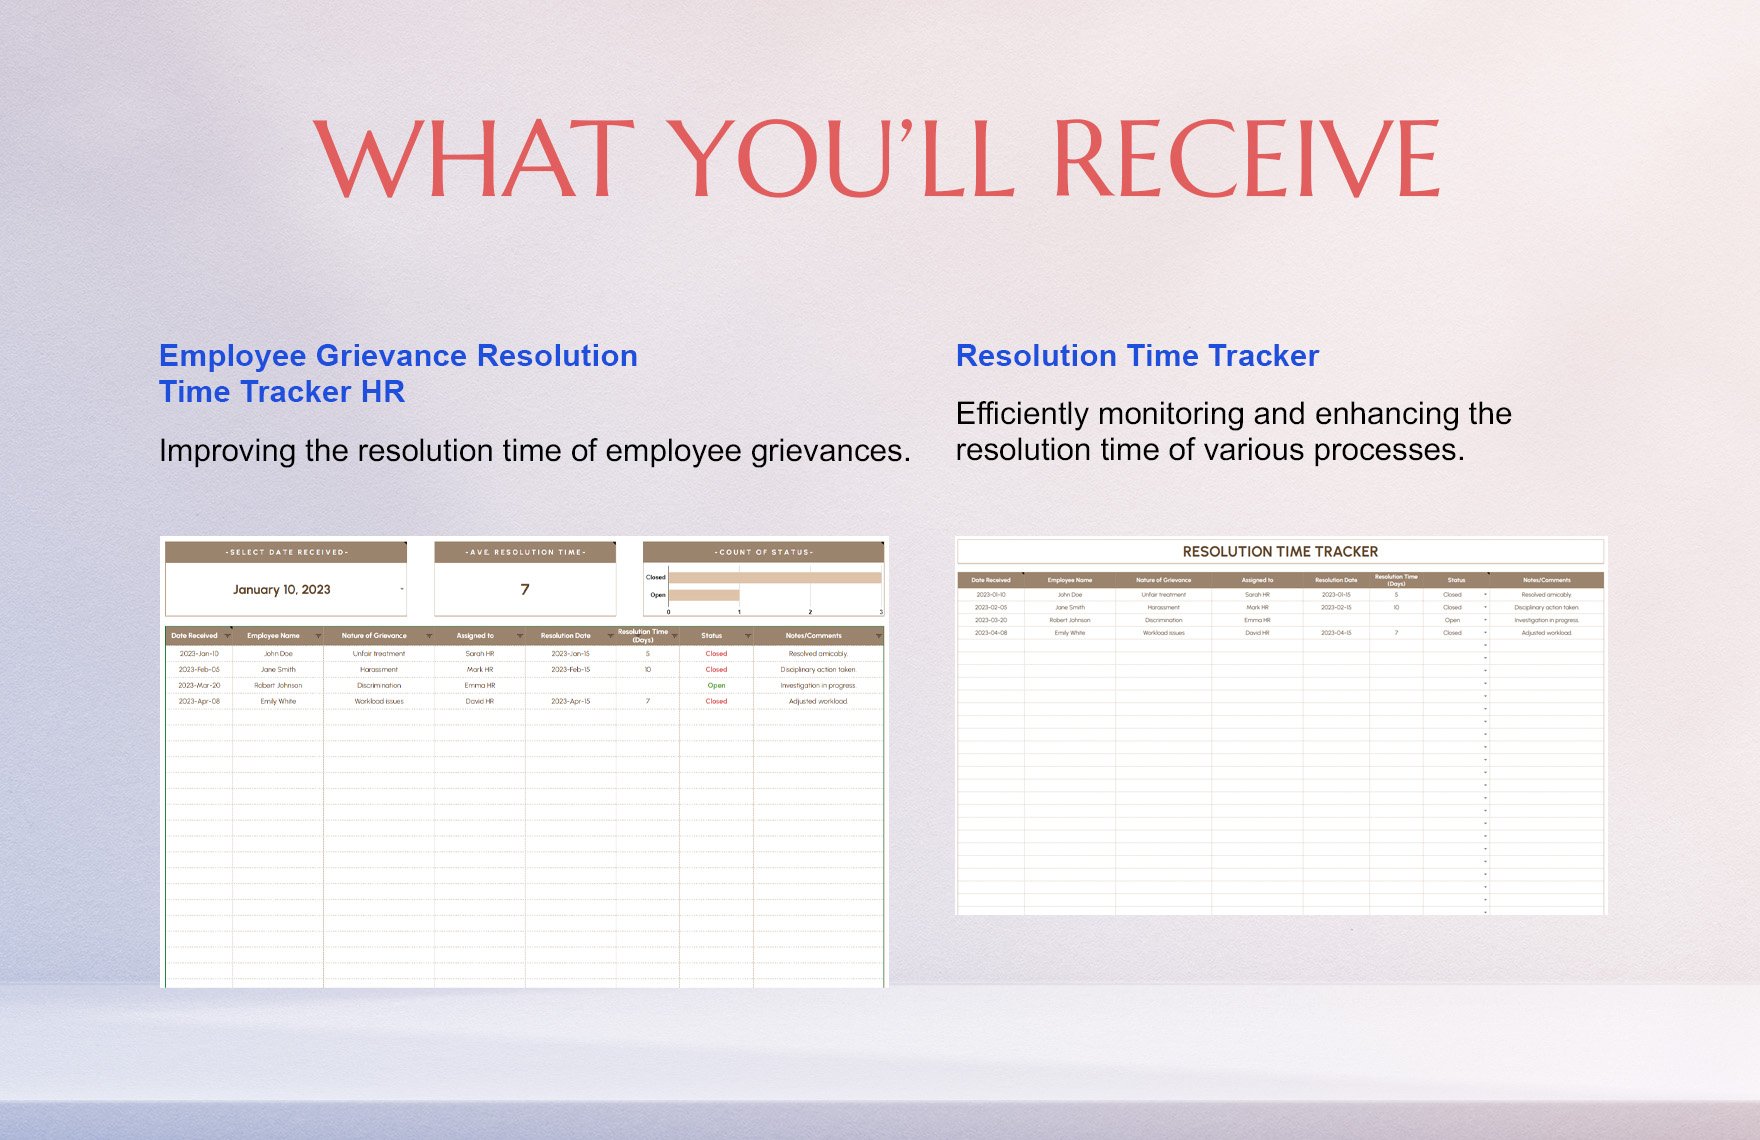 Employee Grievance Resolution Time Tracker HR Template